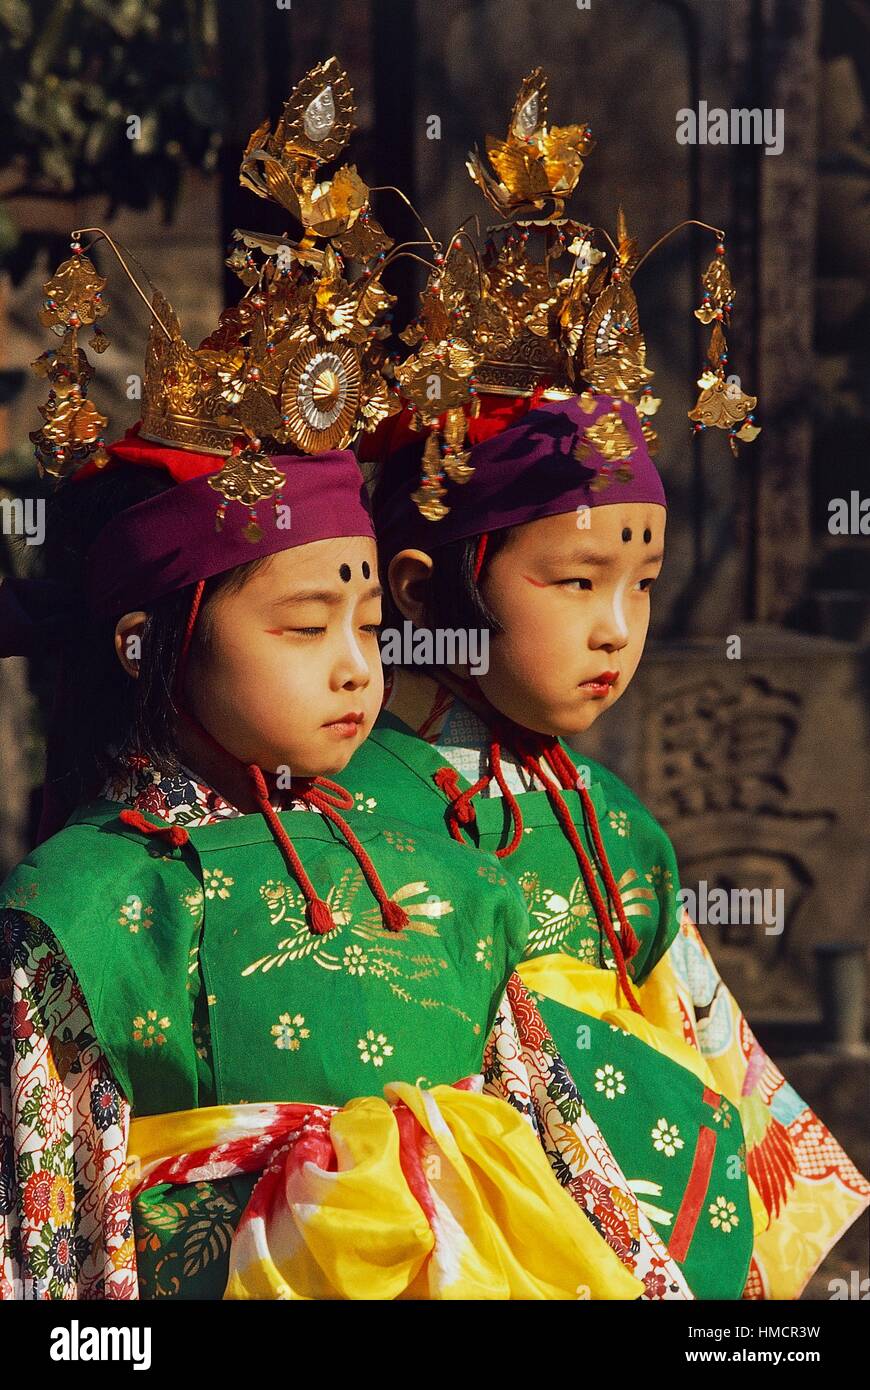 Children Wearing Ceremonial Costumes And Traditional Headdresses Japan